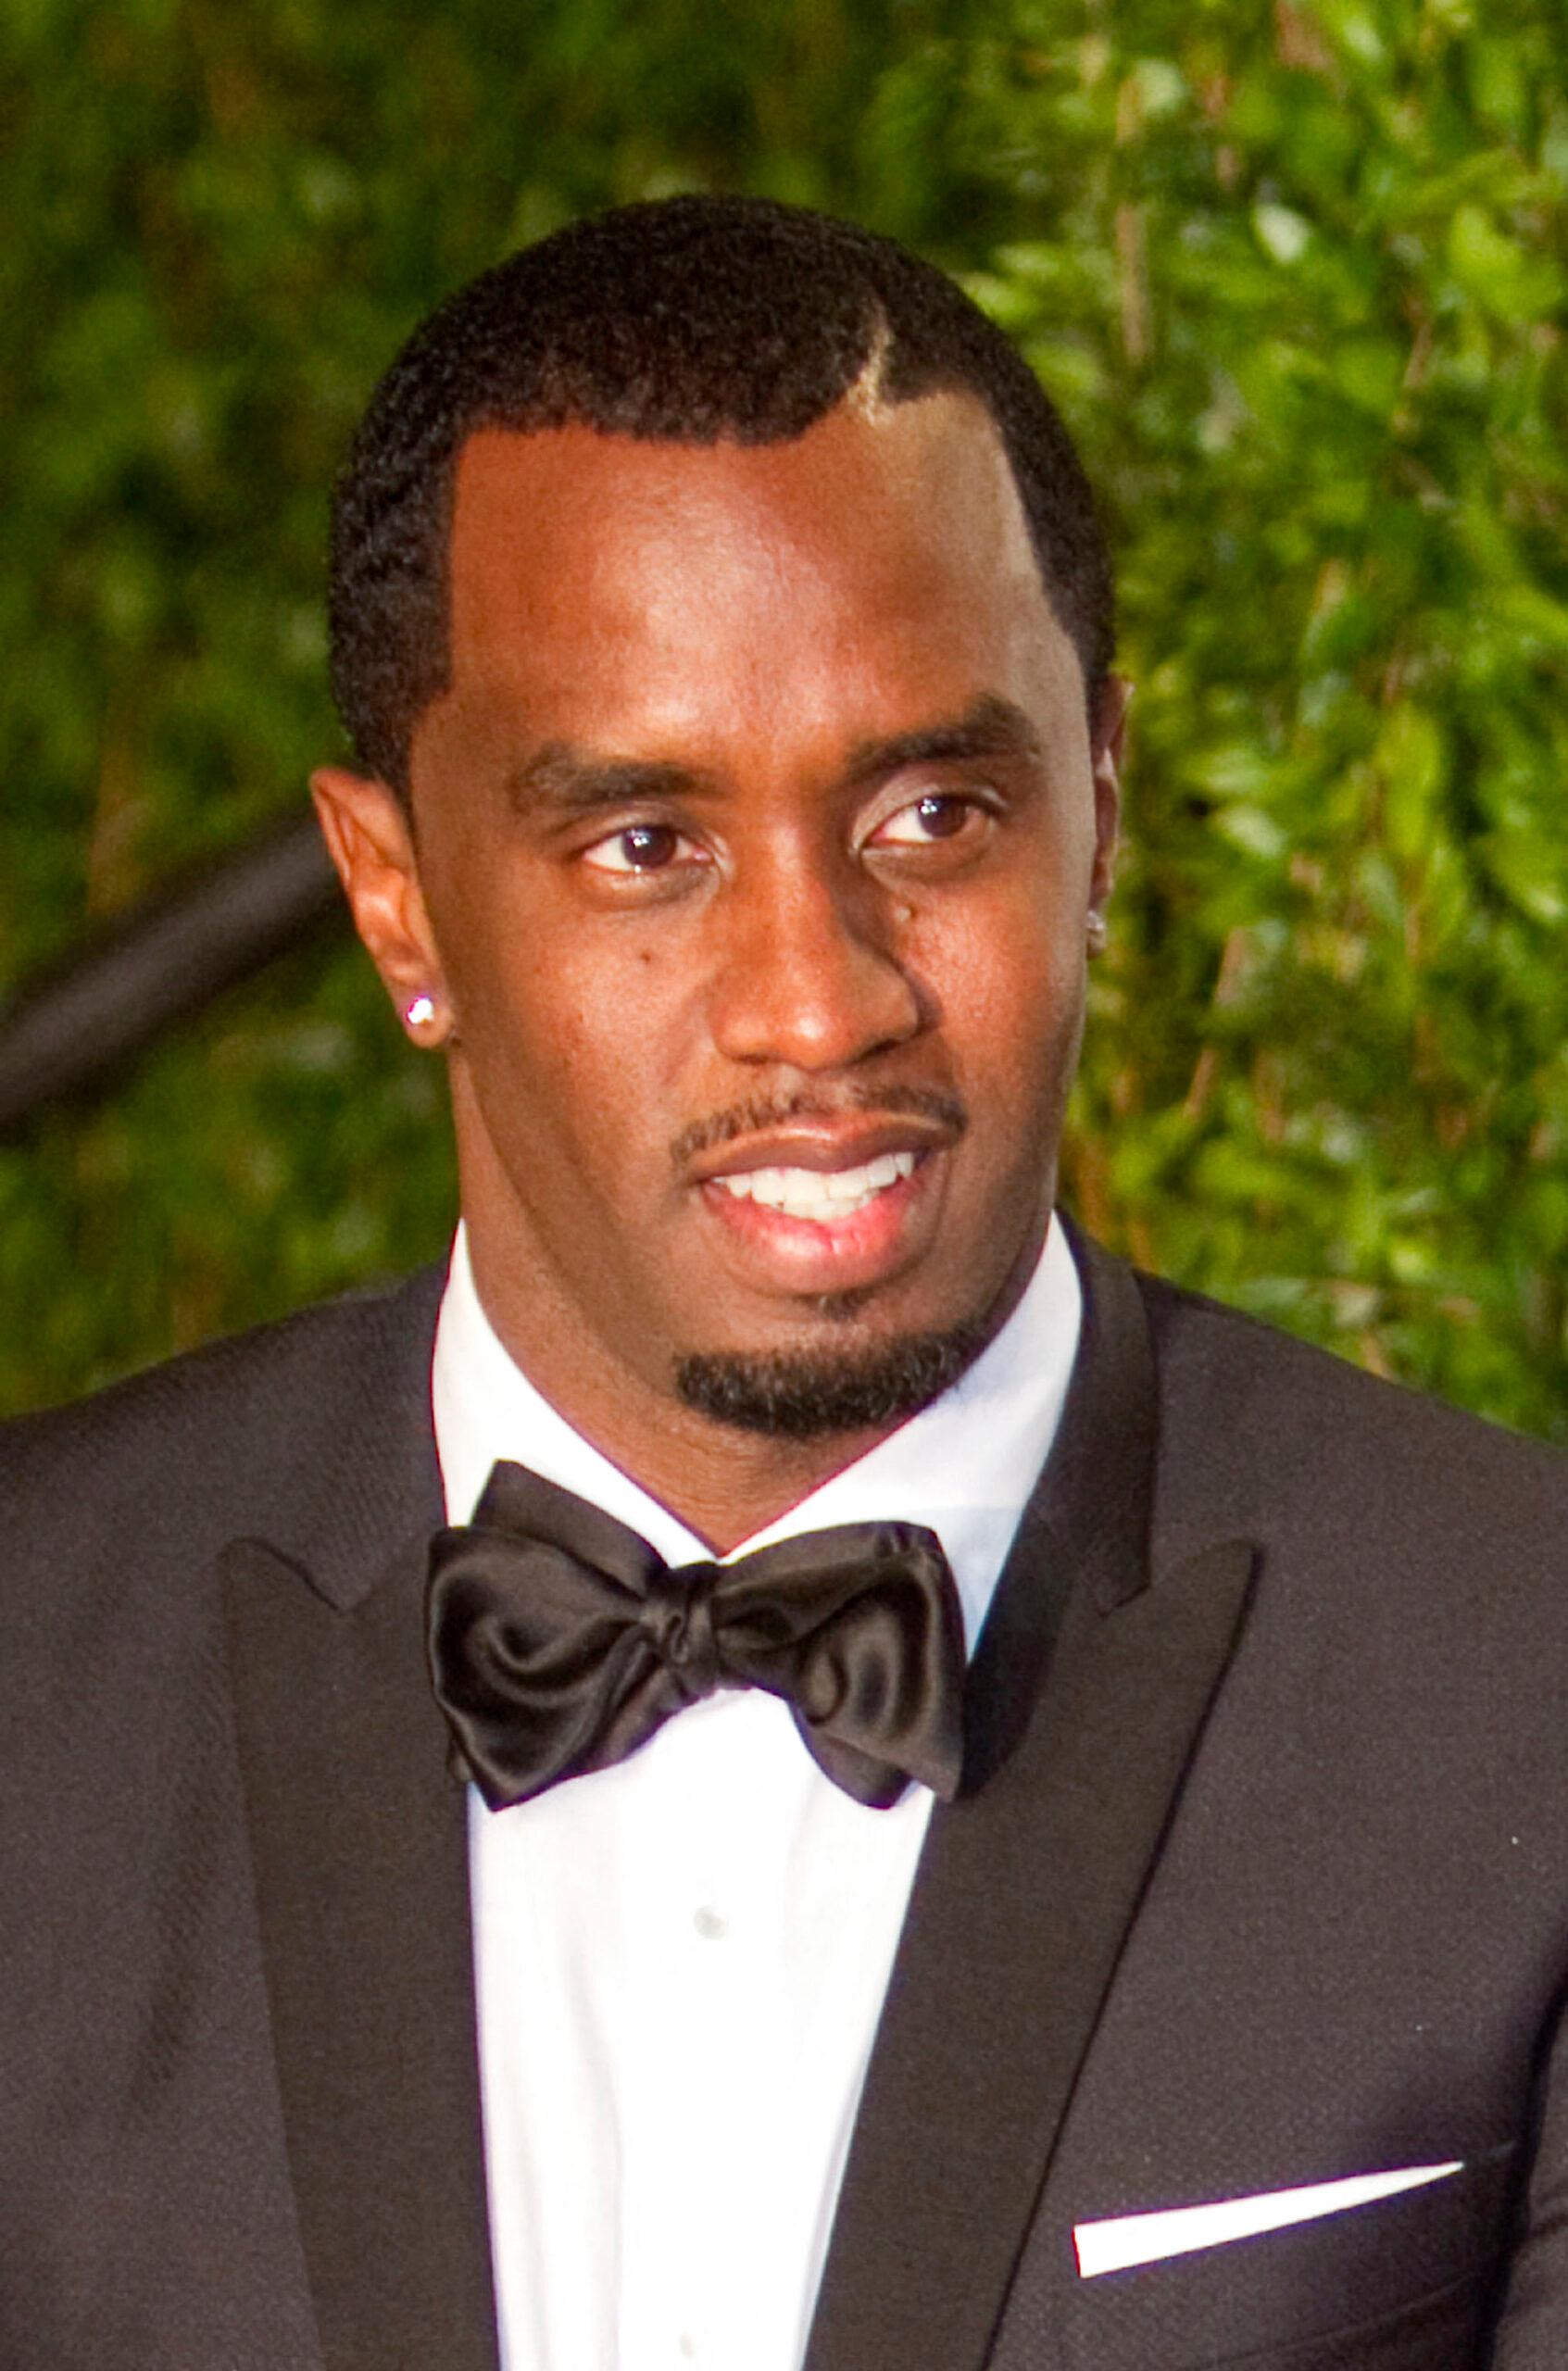 Sean P. Diddy Combs at the 77th Academy Awards Sunday on February 27, 2005 at the Kodak Theater in Hollywood, California.